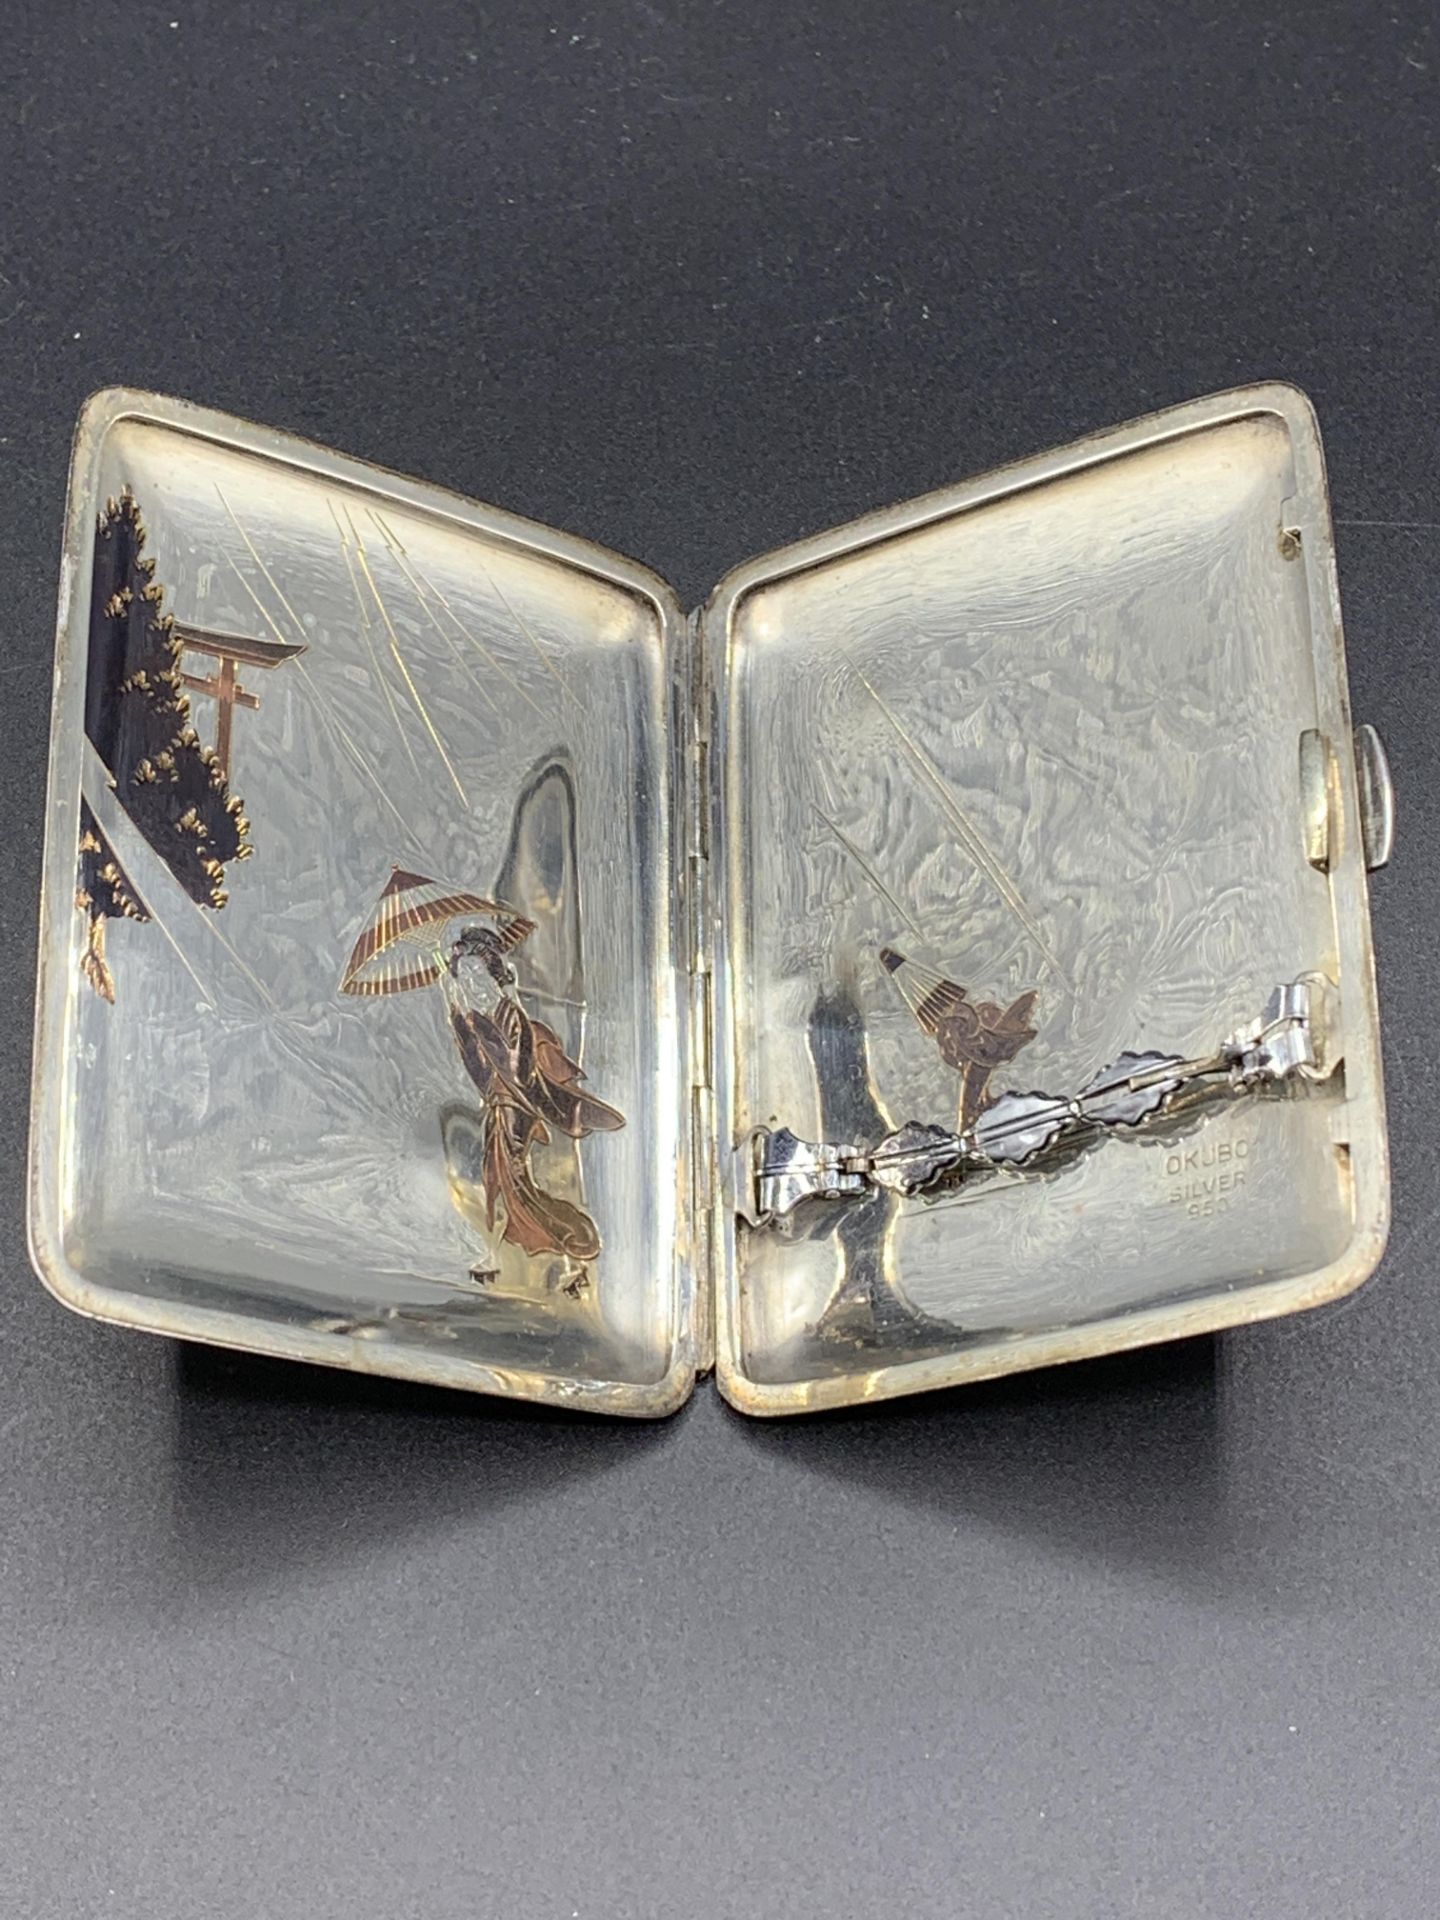 A Japanese Okubo 950 silver small cigarette/card case - Image 3 of 5